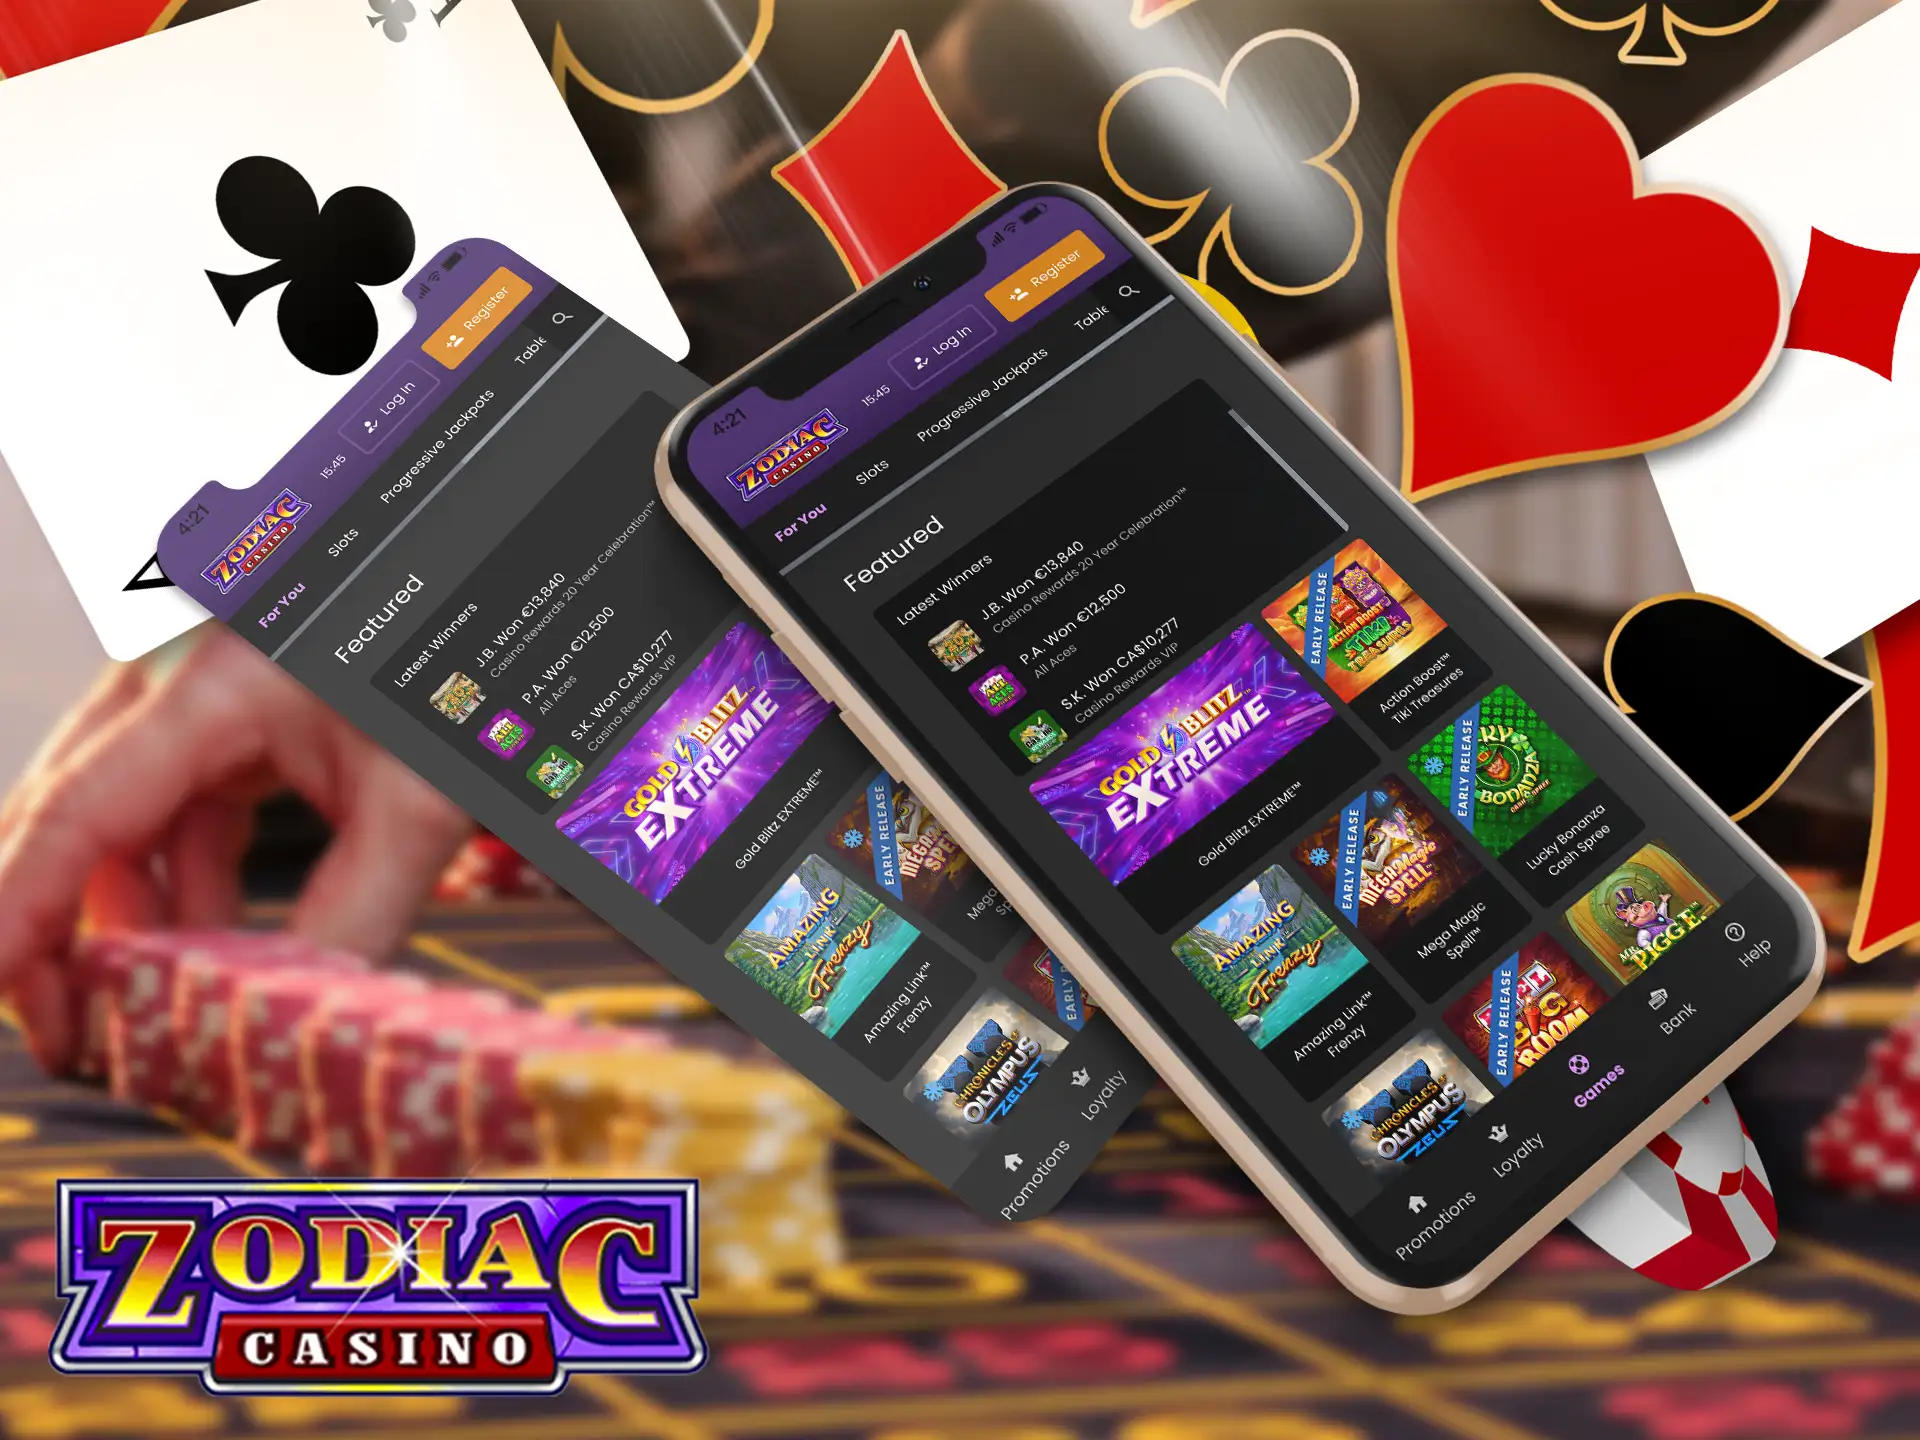 After registration you will receive a link to download the Zodiac Casino app for iOS and Android.